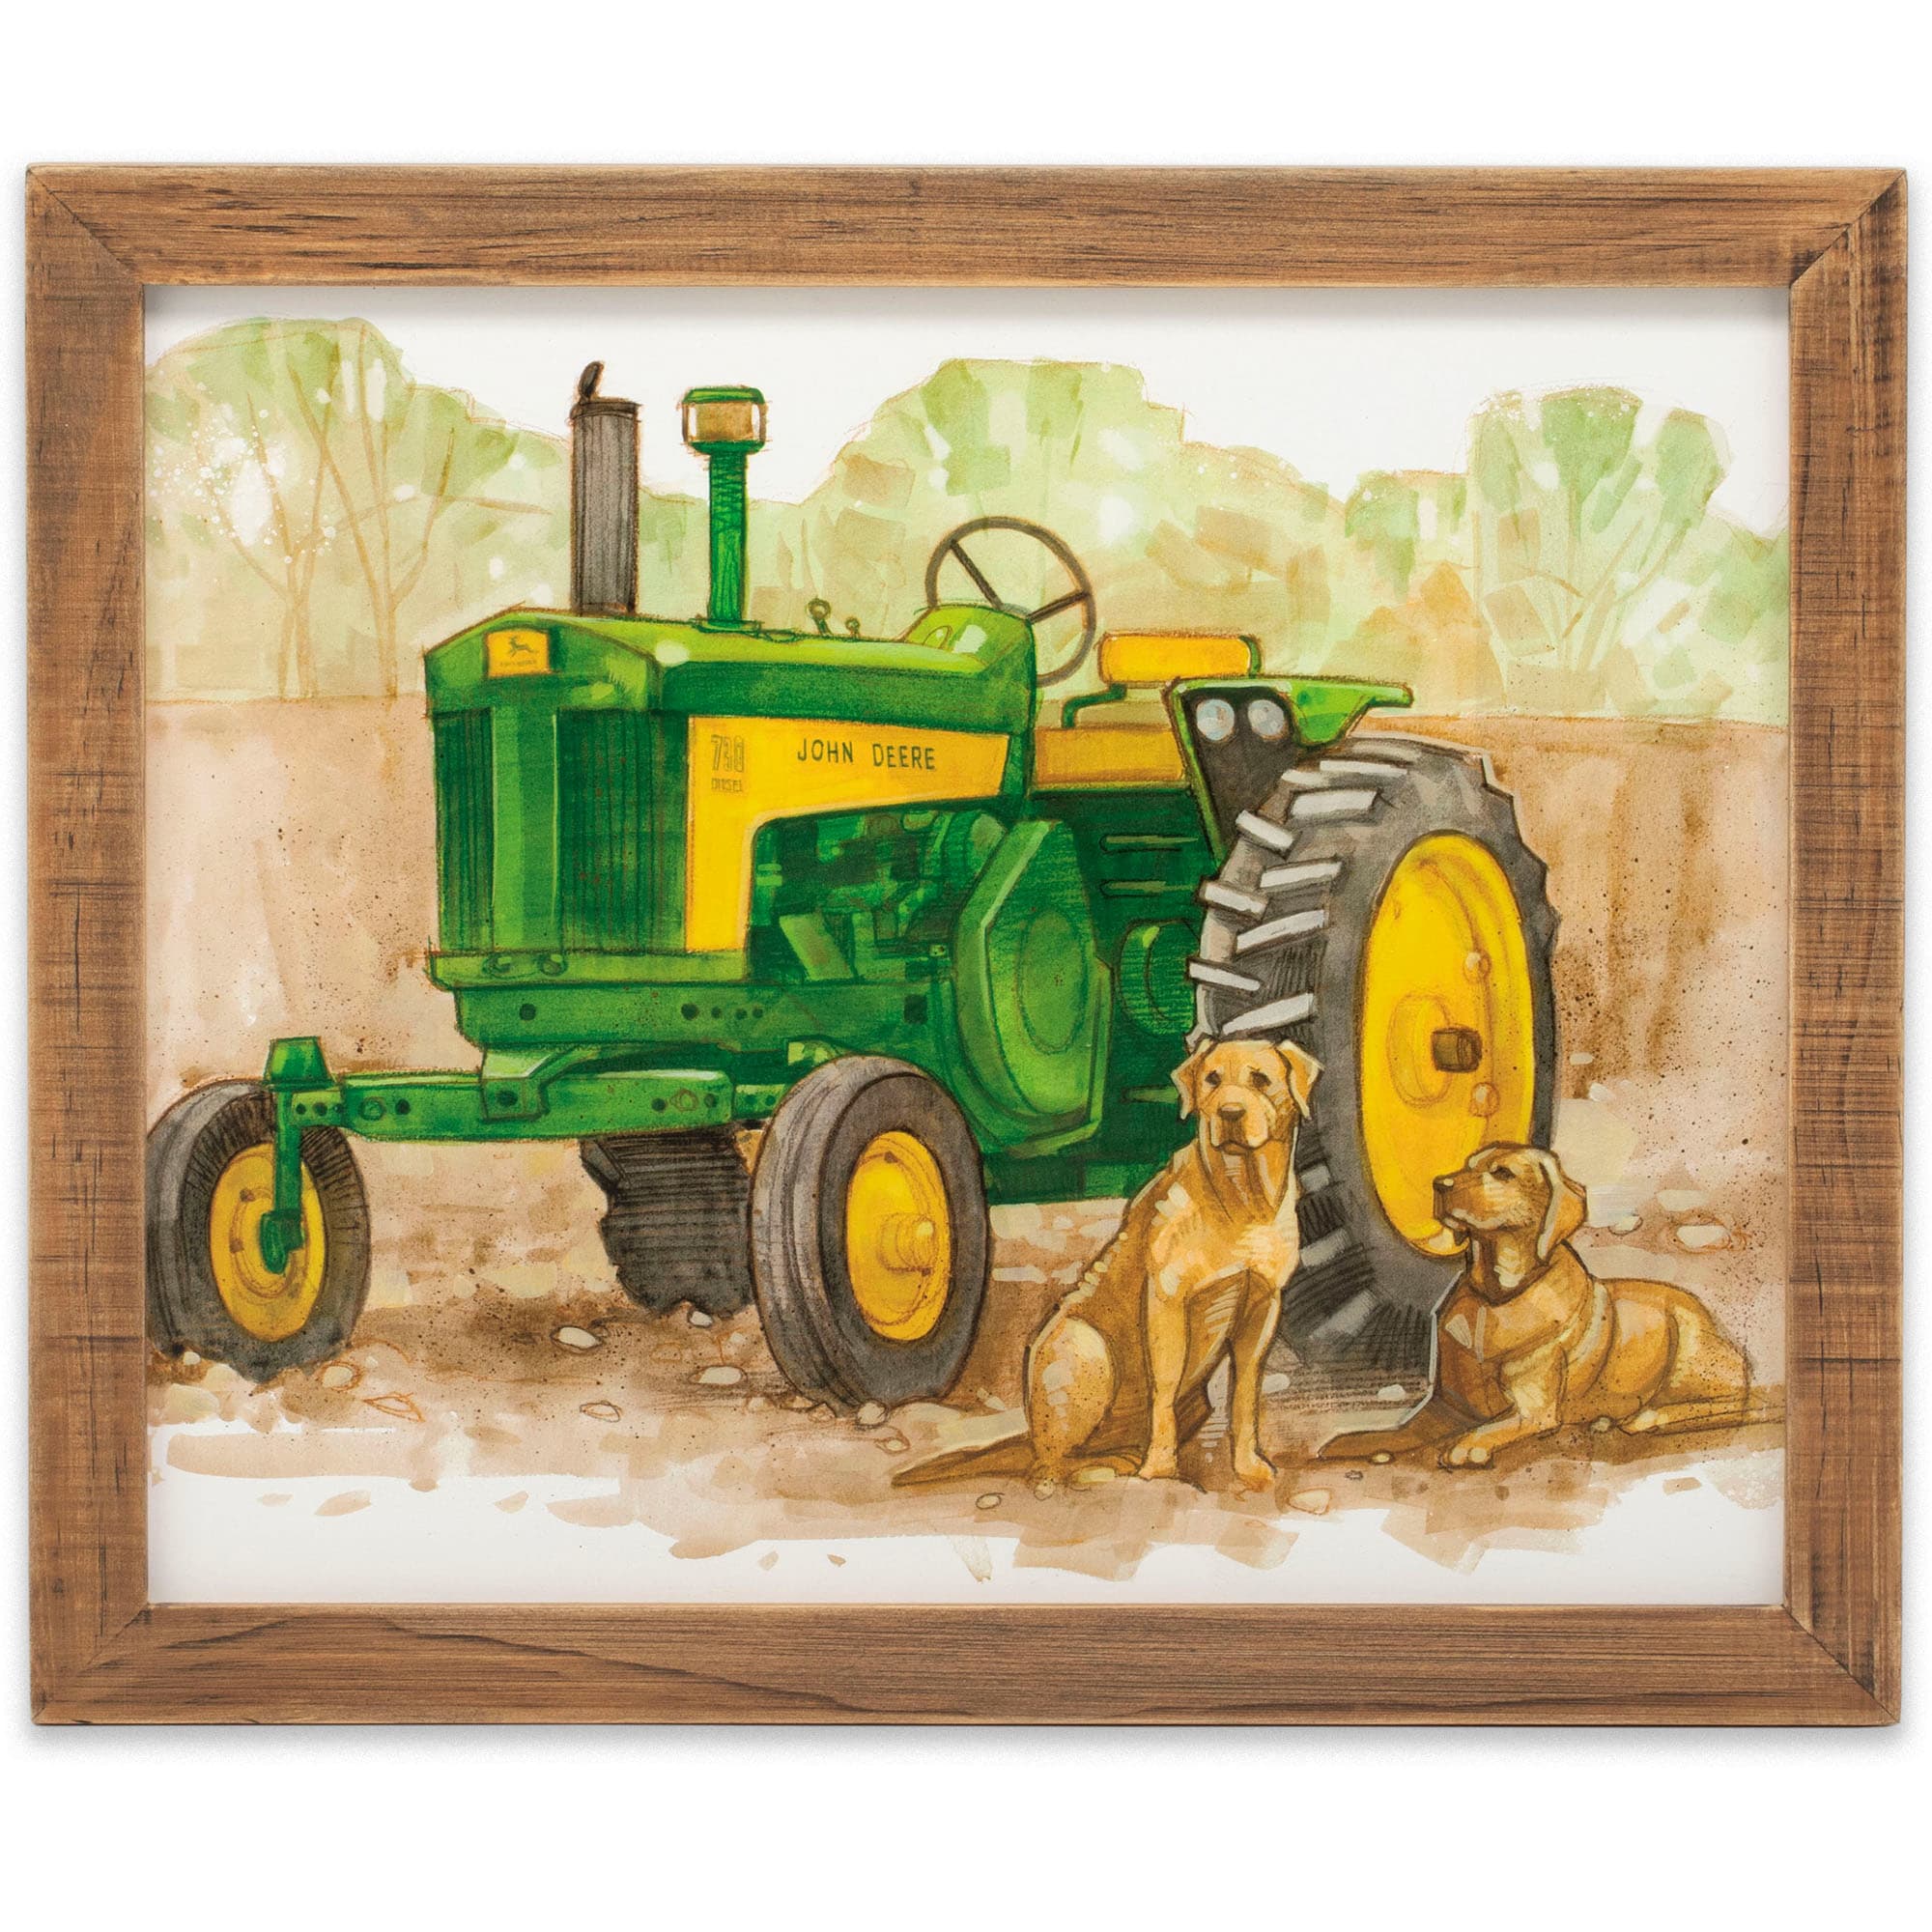 Open Road Brands John Deere Tractor and Dogs Wood Framed Wall Decor, One Size Fits All